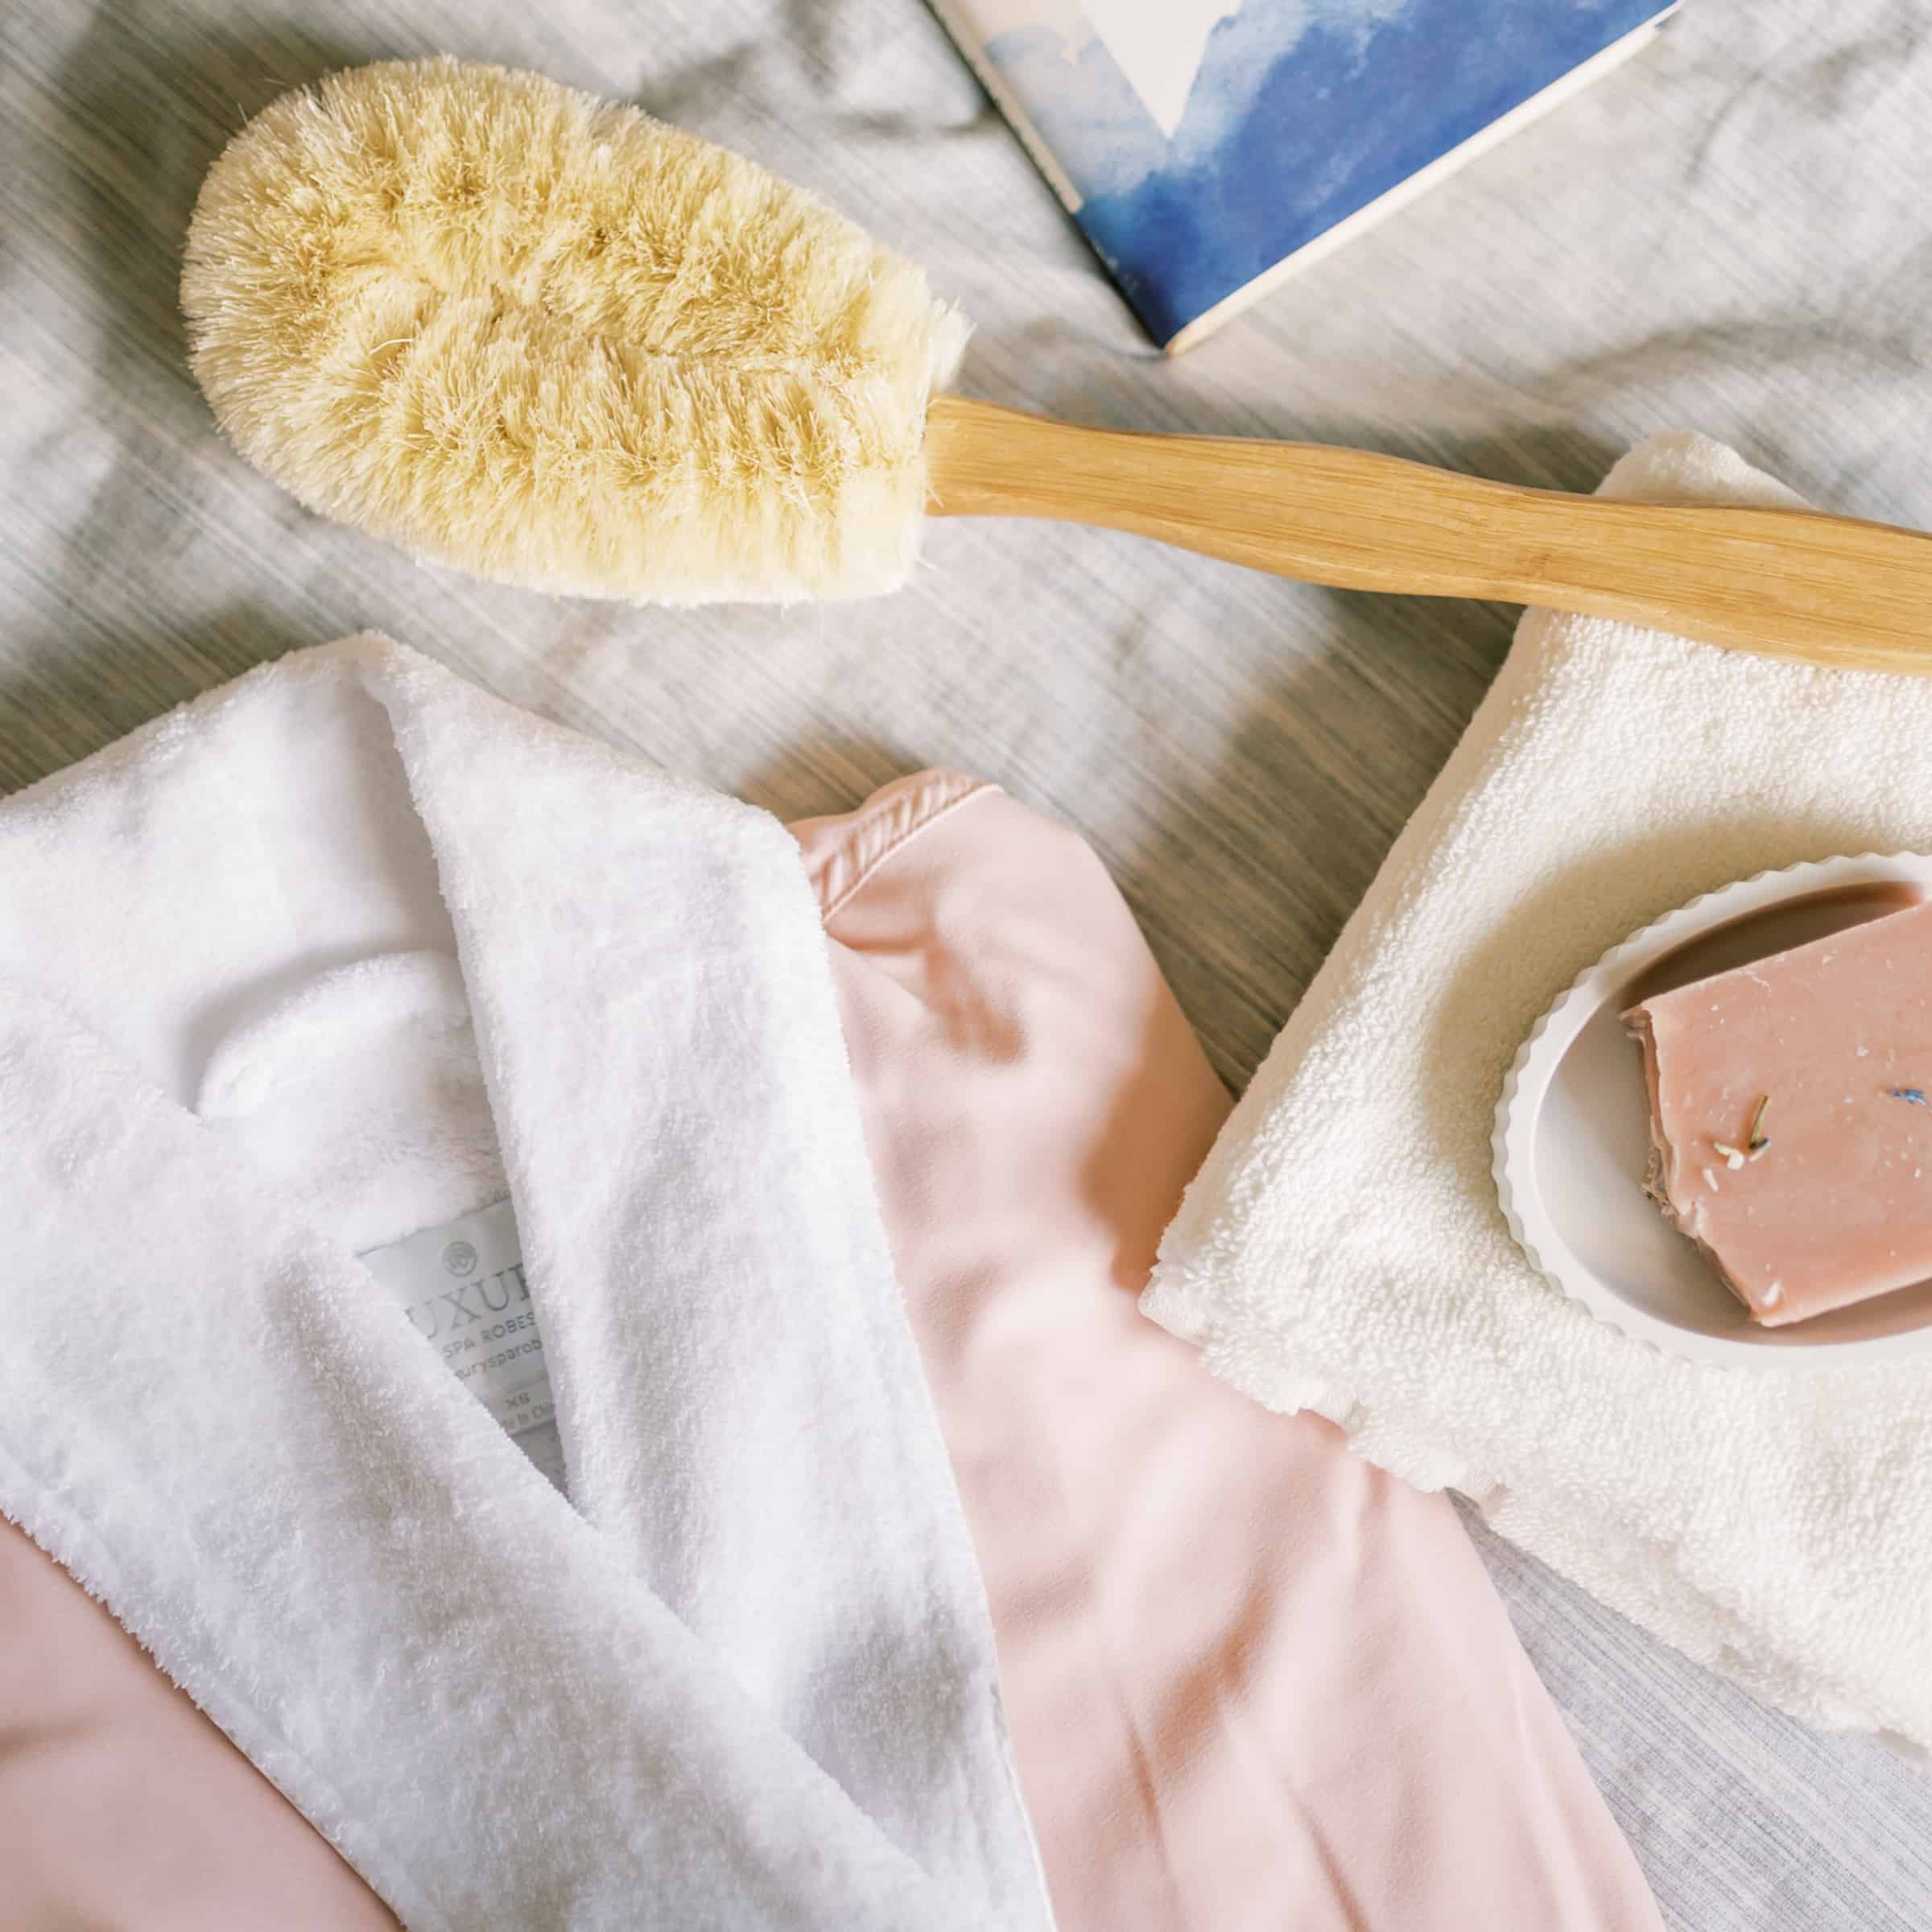 overhead view of a bathrobe, body brush, bar of soap, and washcloth laid out on a cloth cover